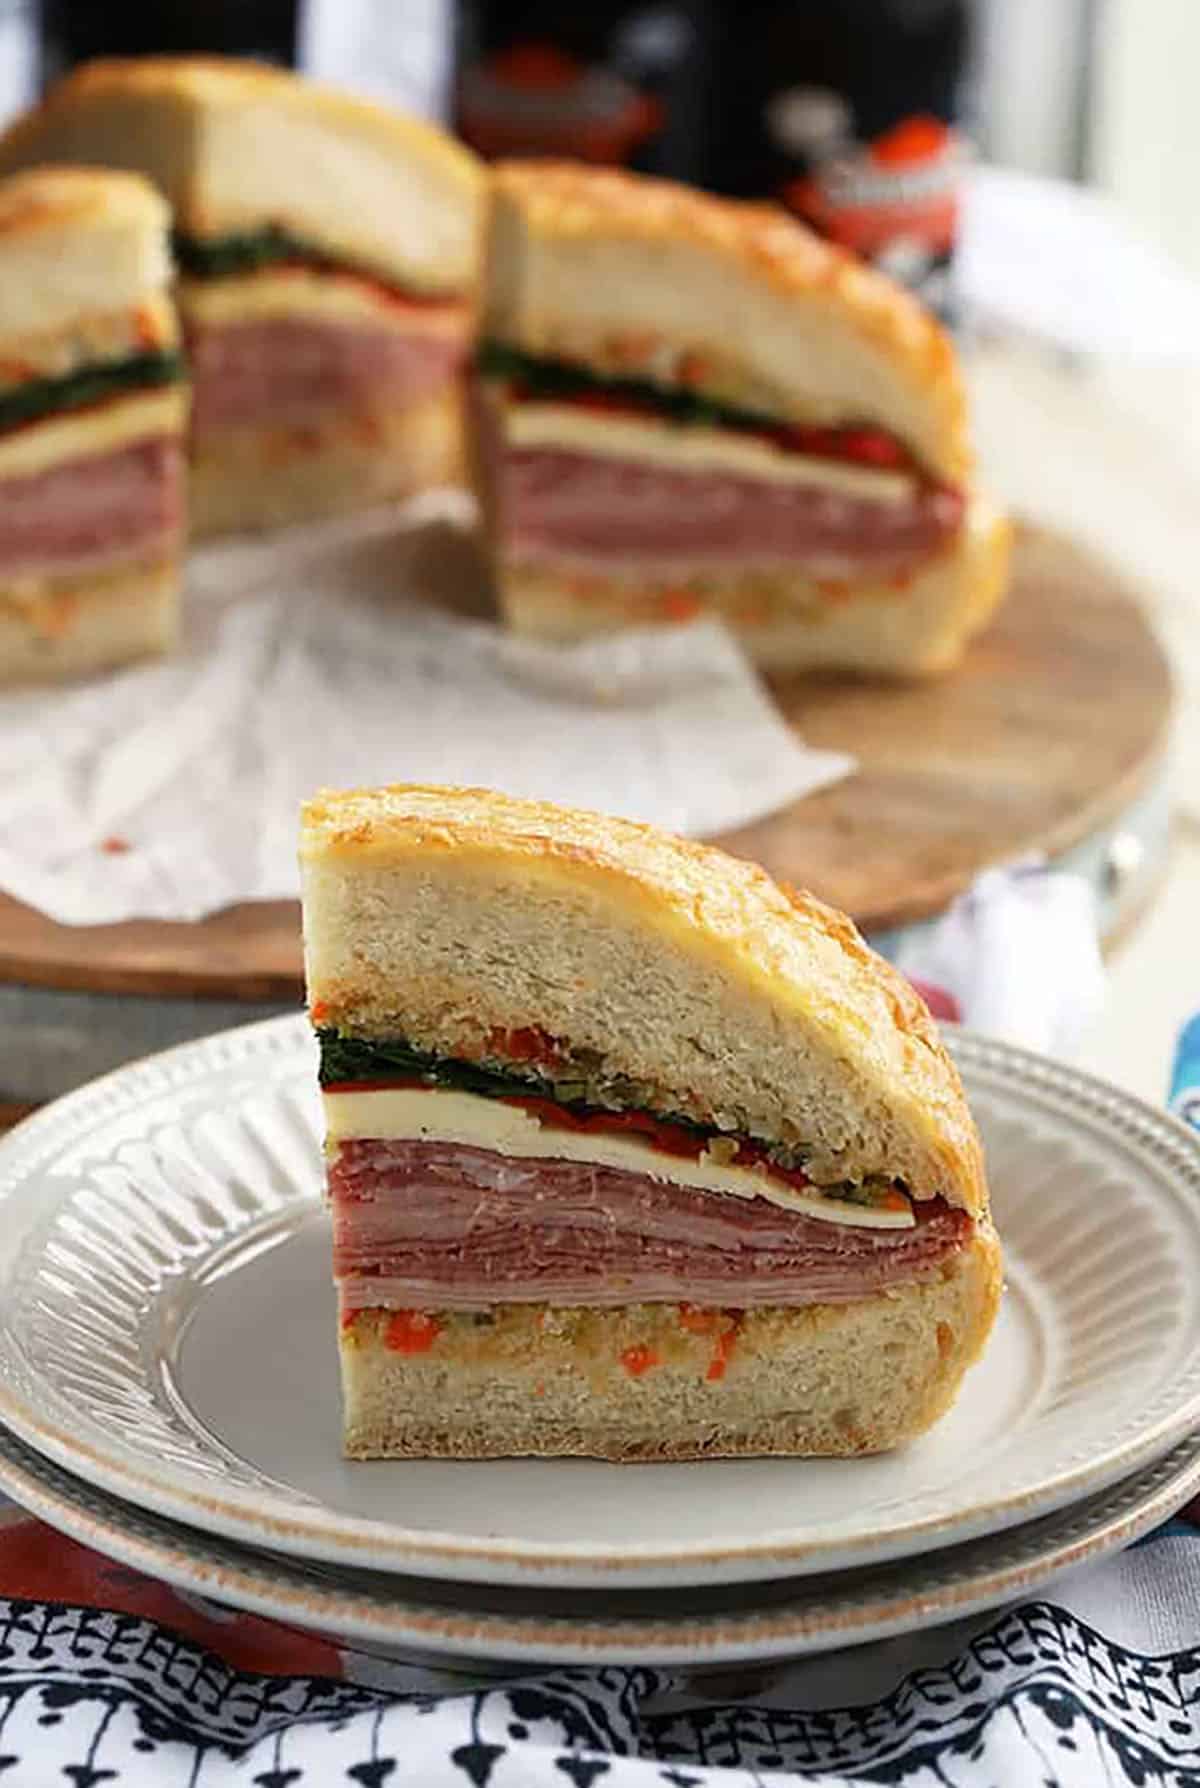 Wedge of a Muffuletta Sandwich on a white plate with other slices behind it.